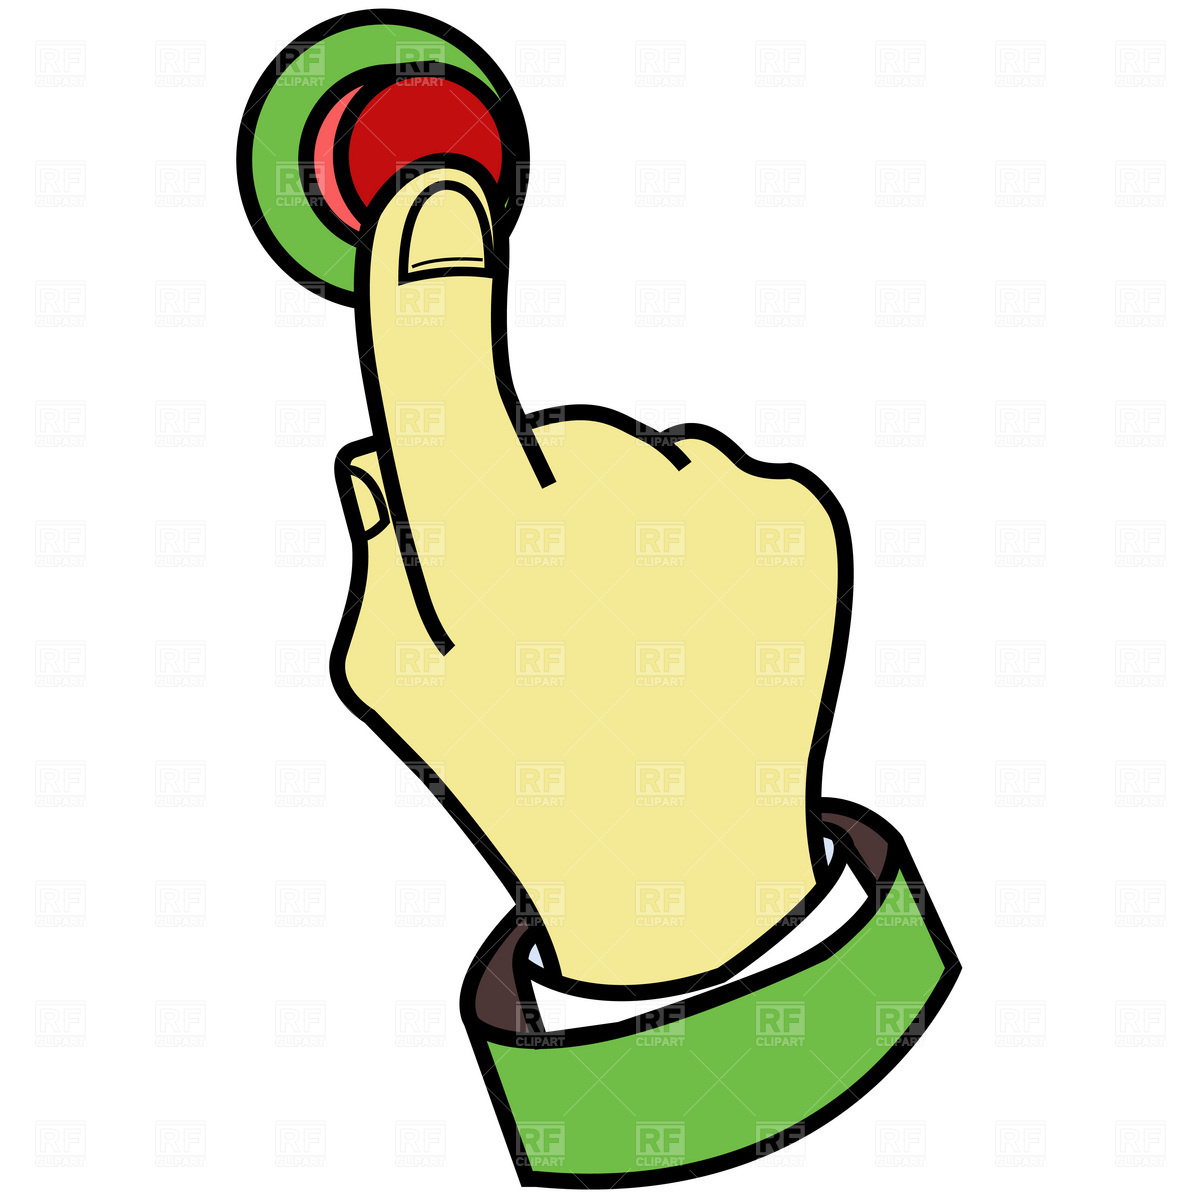 Finger Pressing Button 1833 Download Royalty Free Vector Clipart